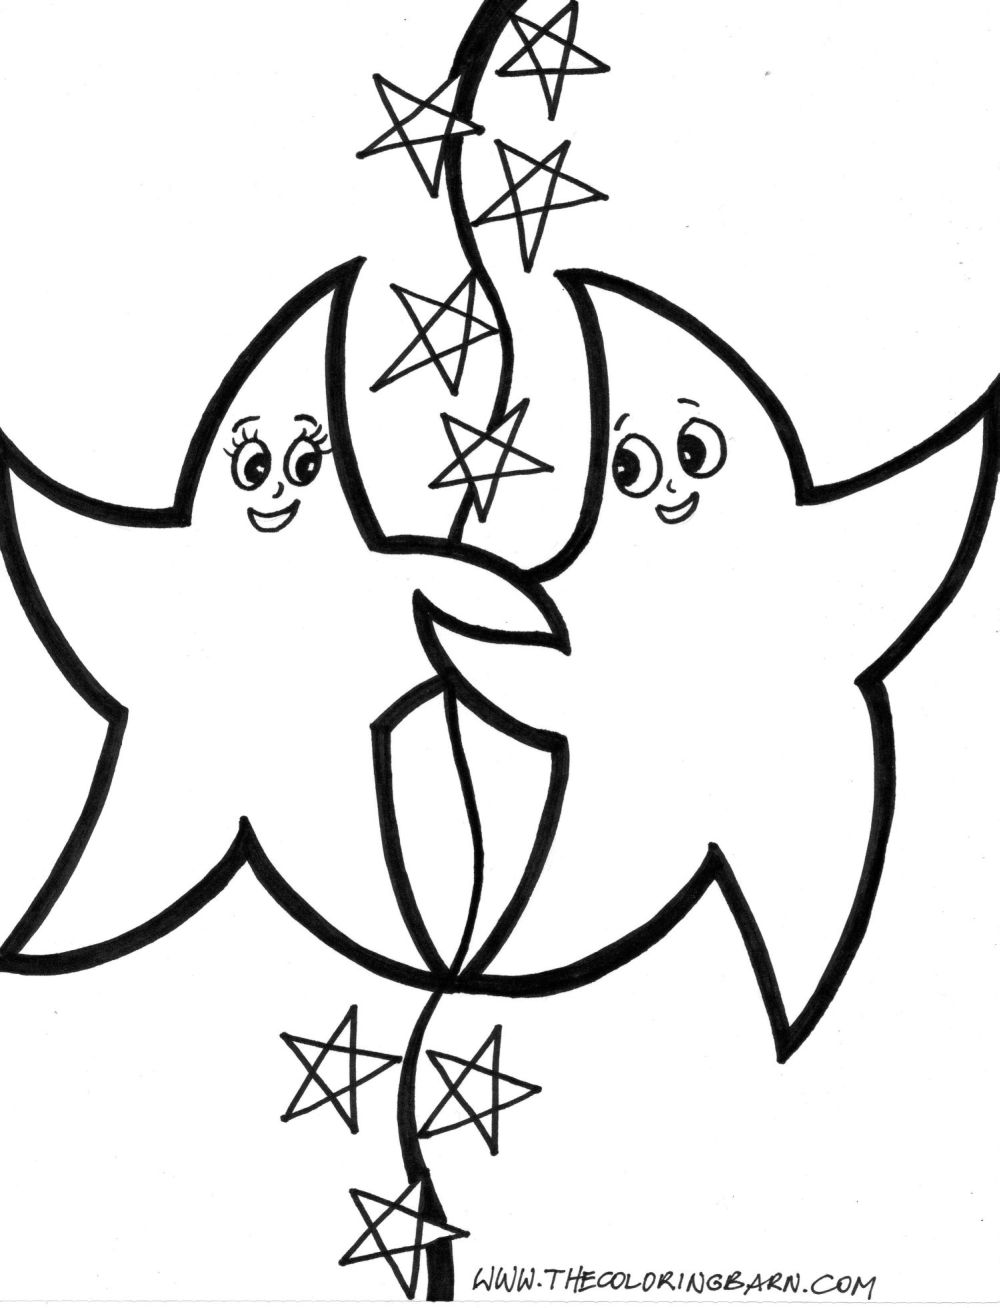 Download Coloring Pages for Kids: Starfish Coloring Pages For Kids